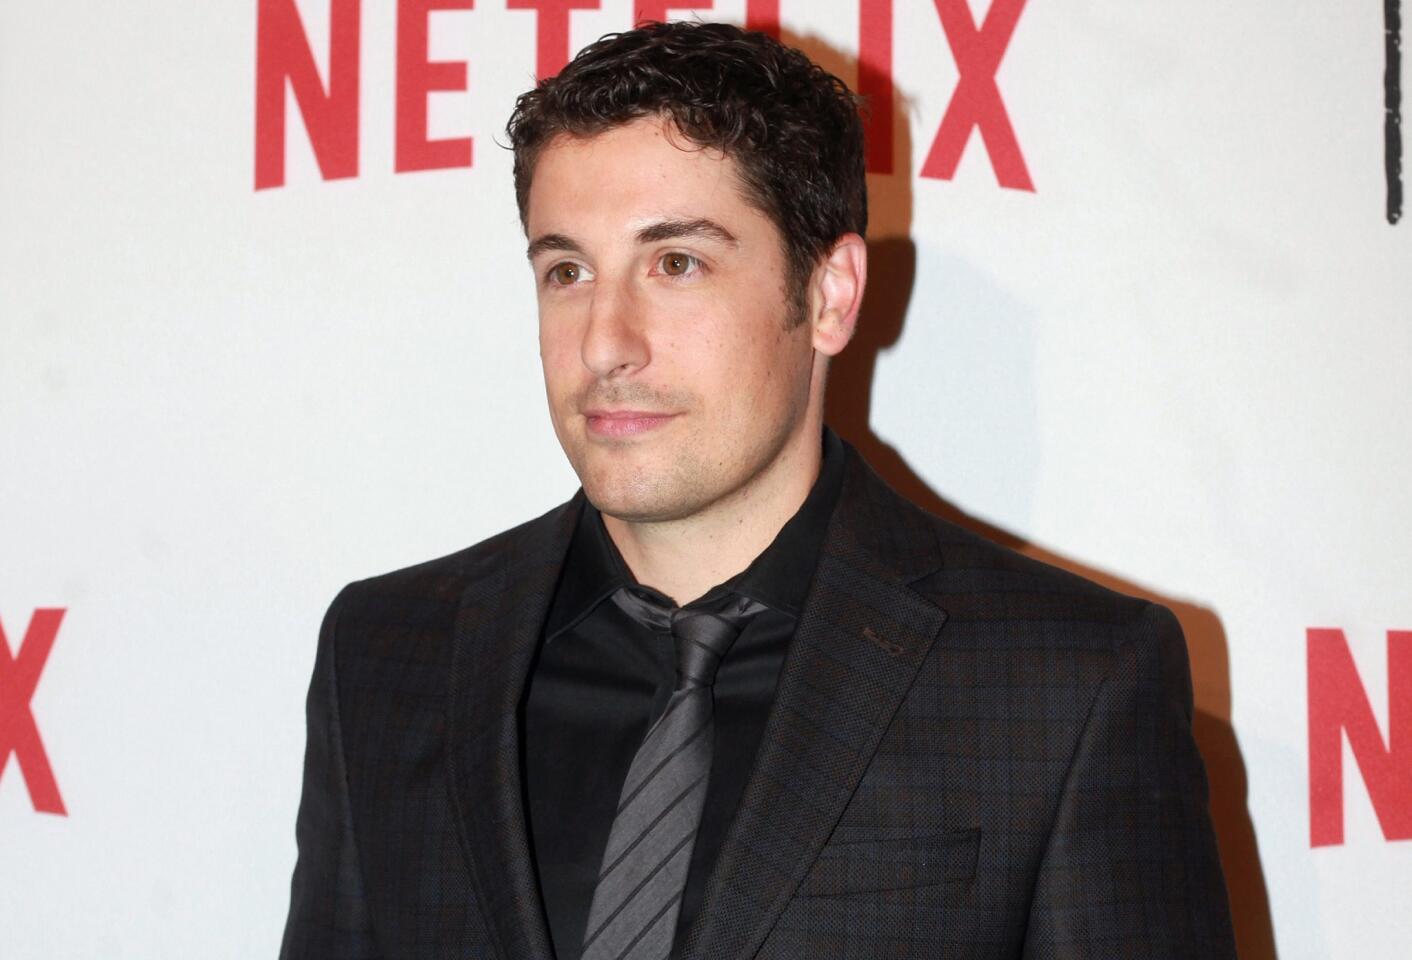 Jason Biggs jokes about Malaysia Airlines, apologizes swiftly